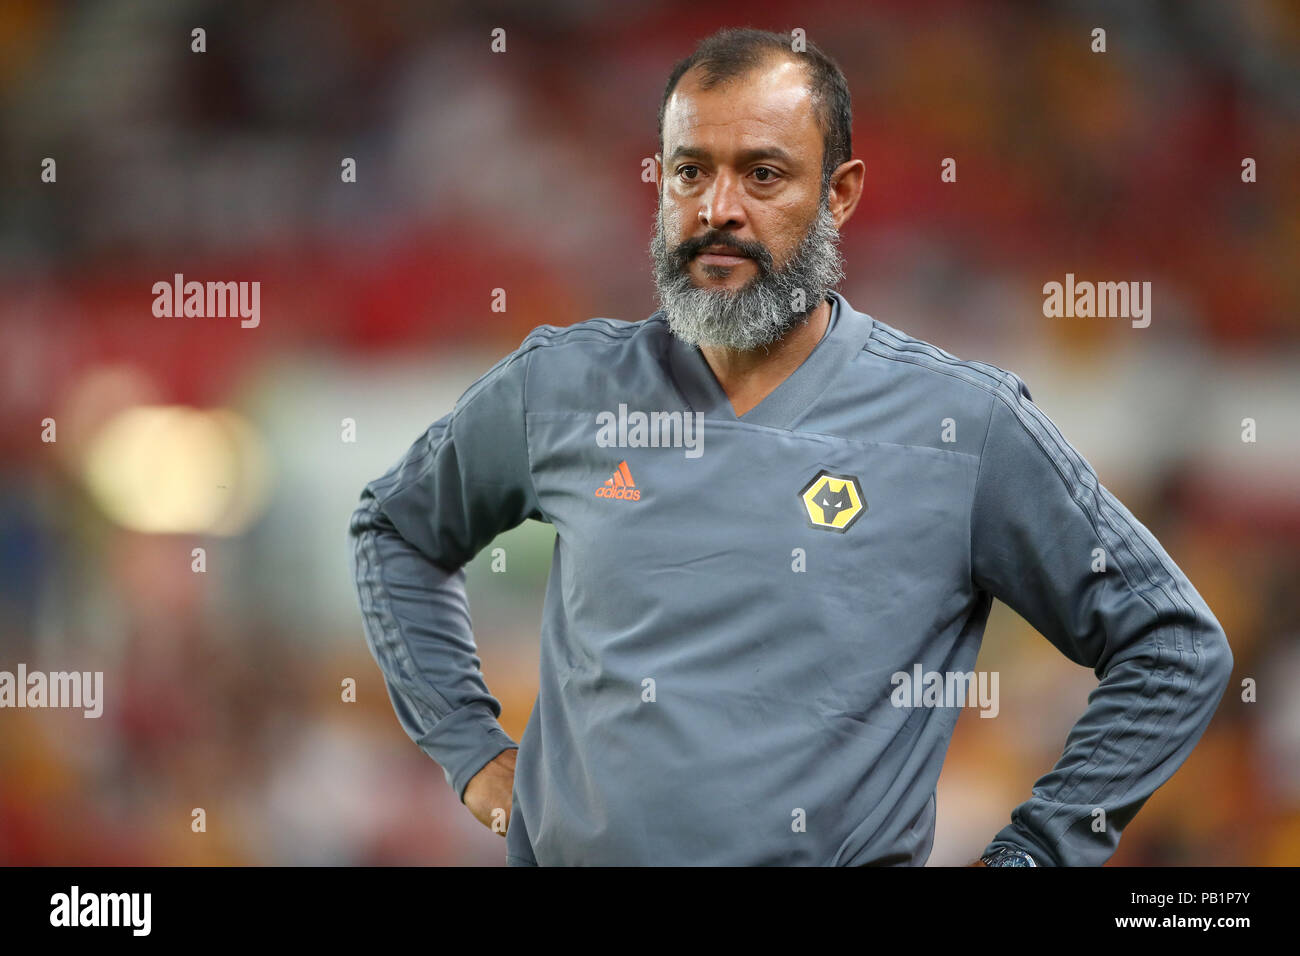 Wolverhampton Wanderers Manager Nuno Esp'rito Santo gestures during a pre season friendly match at The Bet365 Stadium, Stoke. PRESS ASSOCIATION Photo. Picture date: Wednesday July 25, 2018. Photo credit should read: Nick Potts/PA Wire. EDITORIAL USE ONLY No use with unauthorised audio, video, data, fixture lists, club/league logos or 'live' services. Online in-match use limited to 75 images, no video emulation. No use in betting, games or single club/league/player publications. Stock Photo